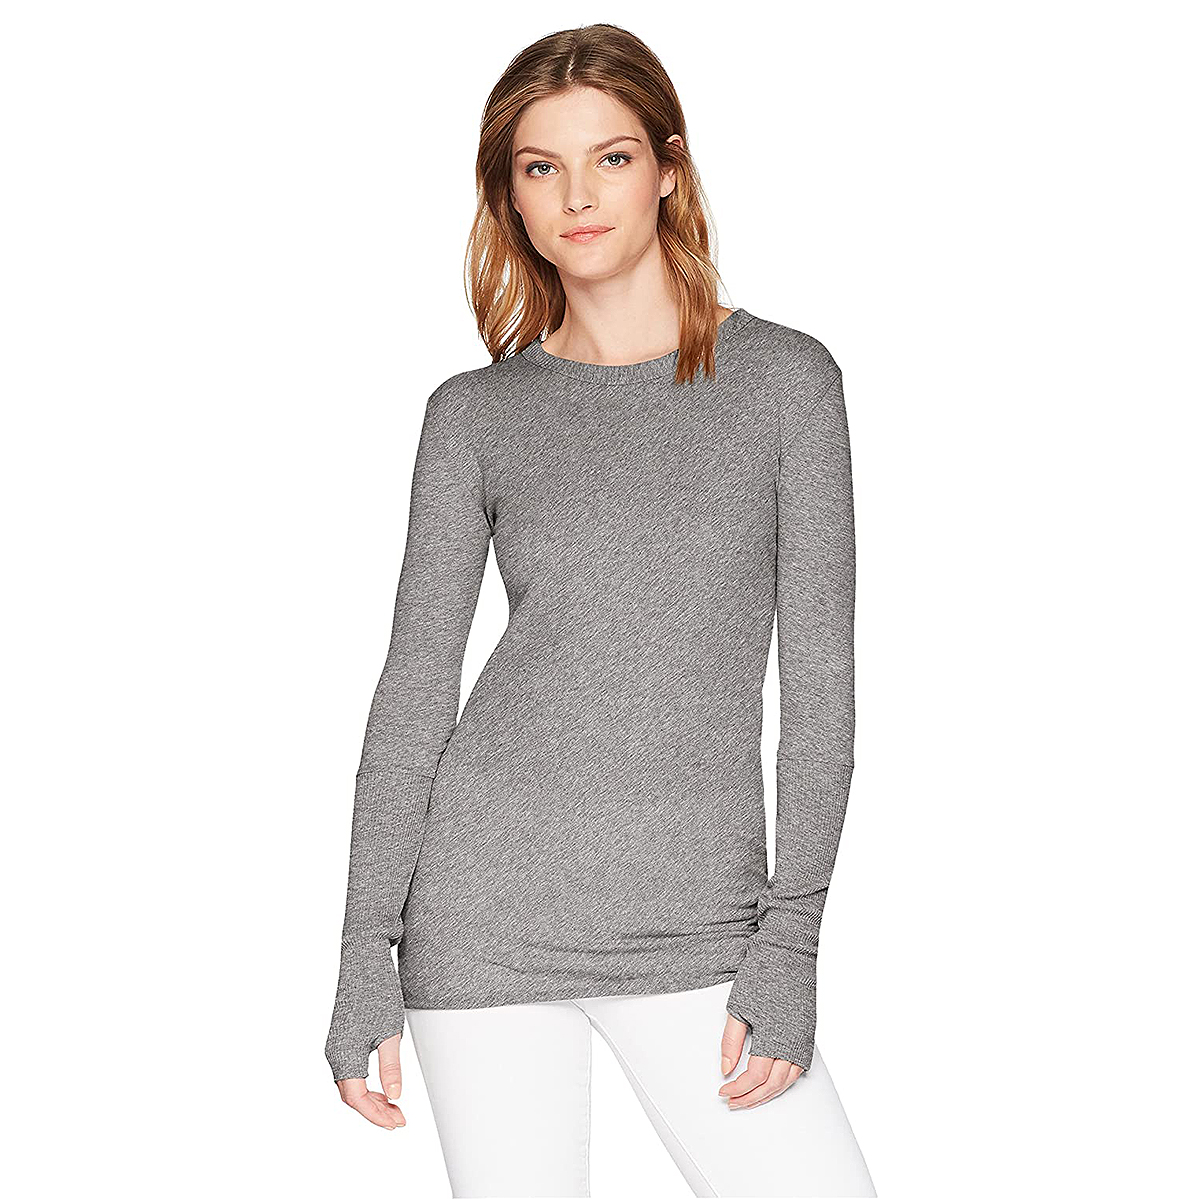 Enza Costa Cashmere-Blend Top Has the Cutest Thumbholes | UsWeekly